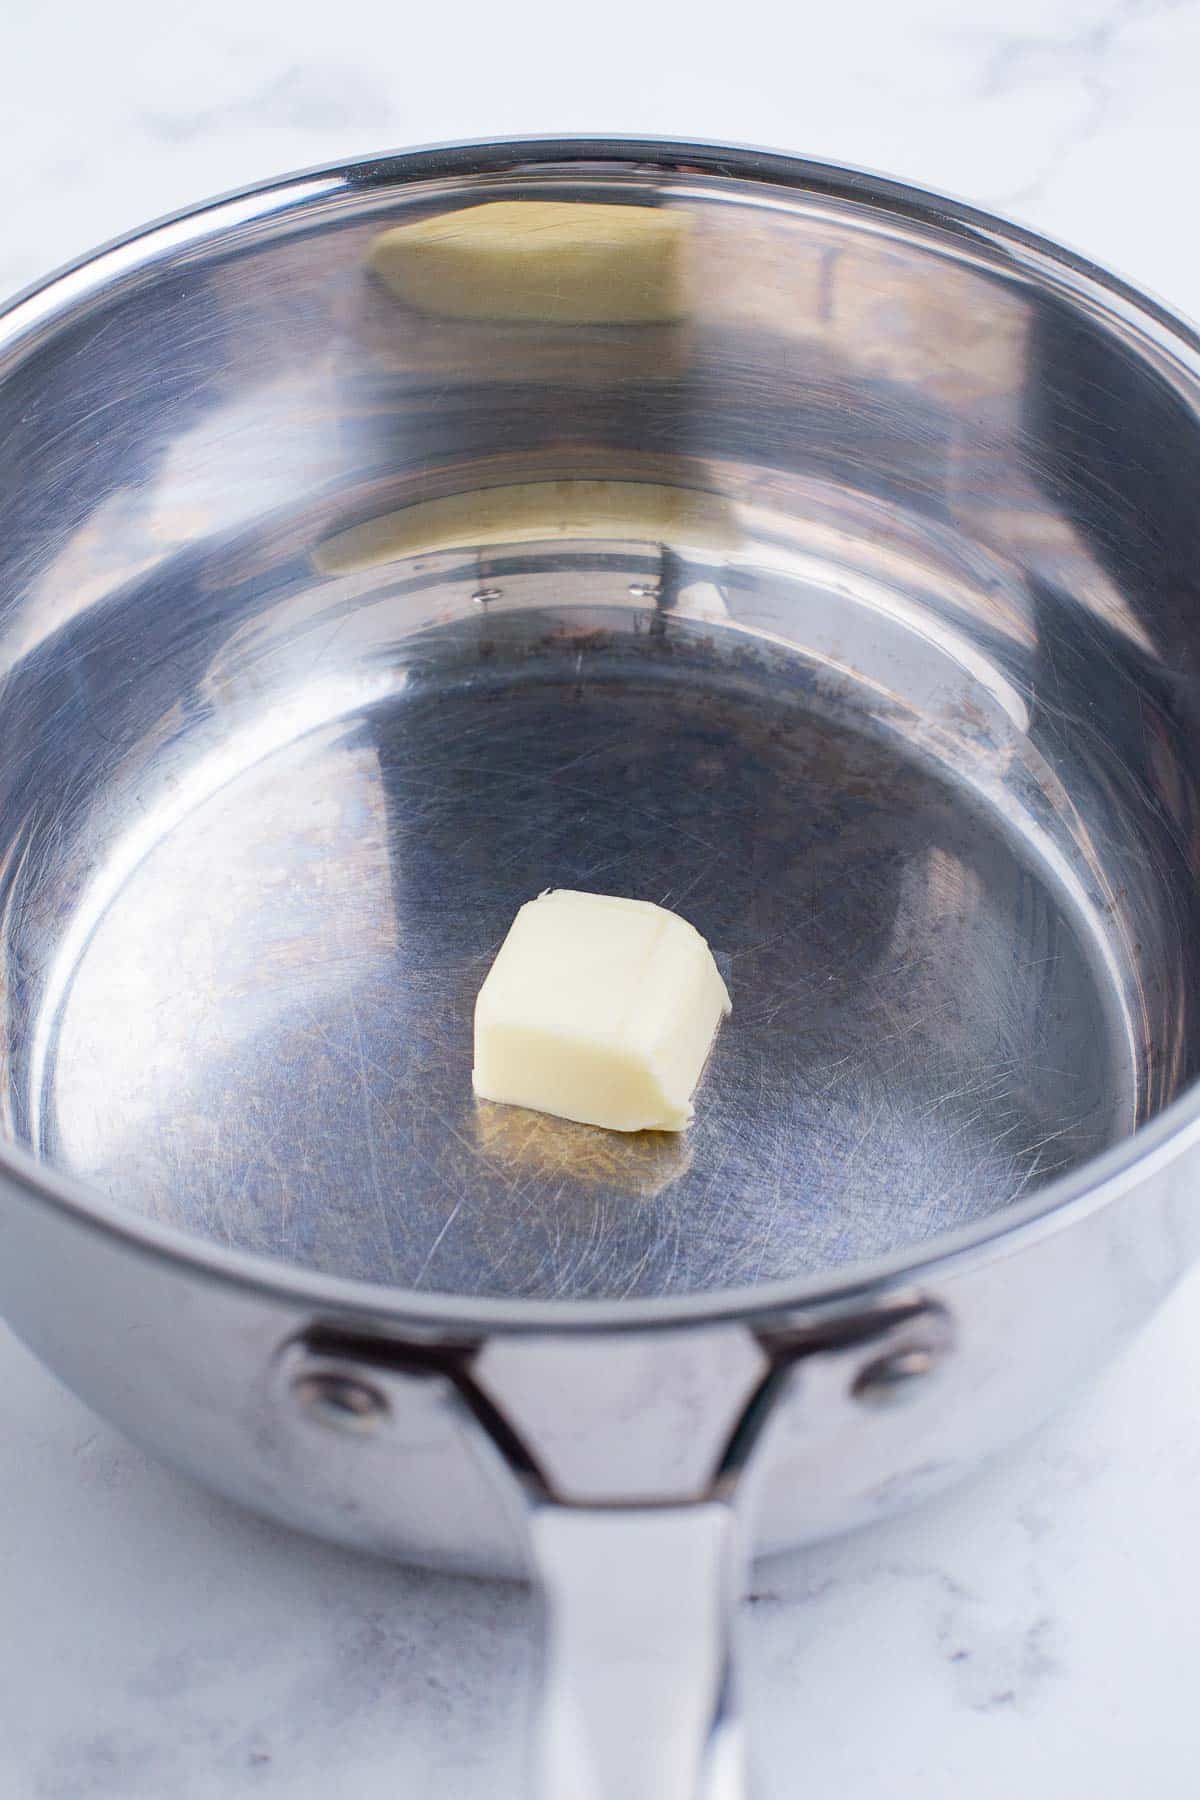 Butter is cooked in a saucepan.